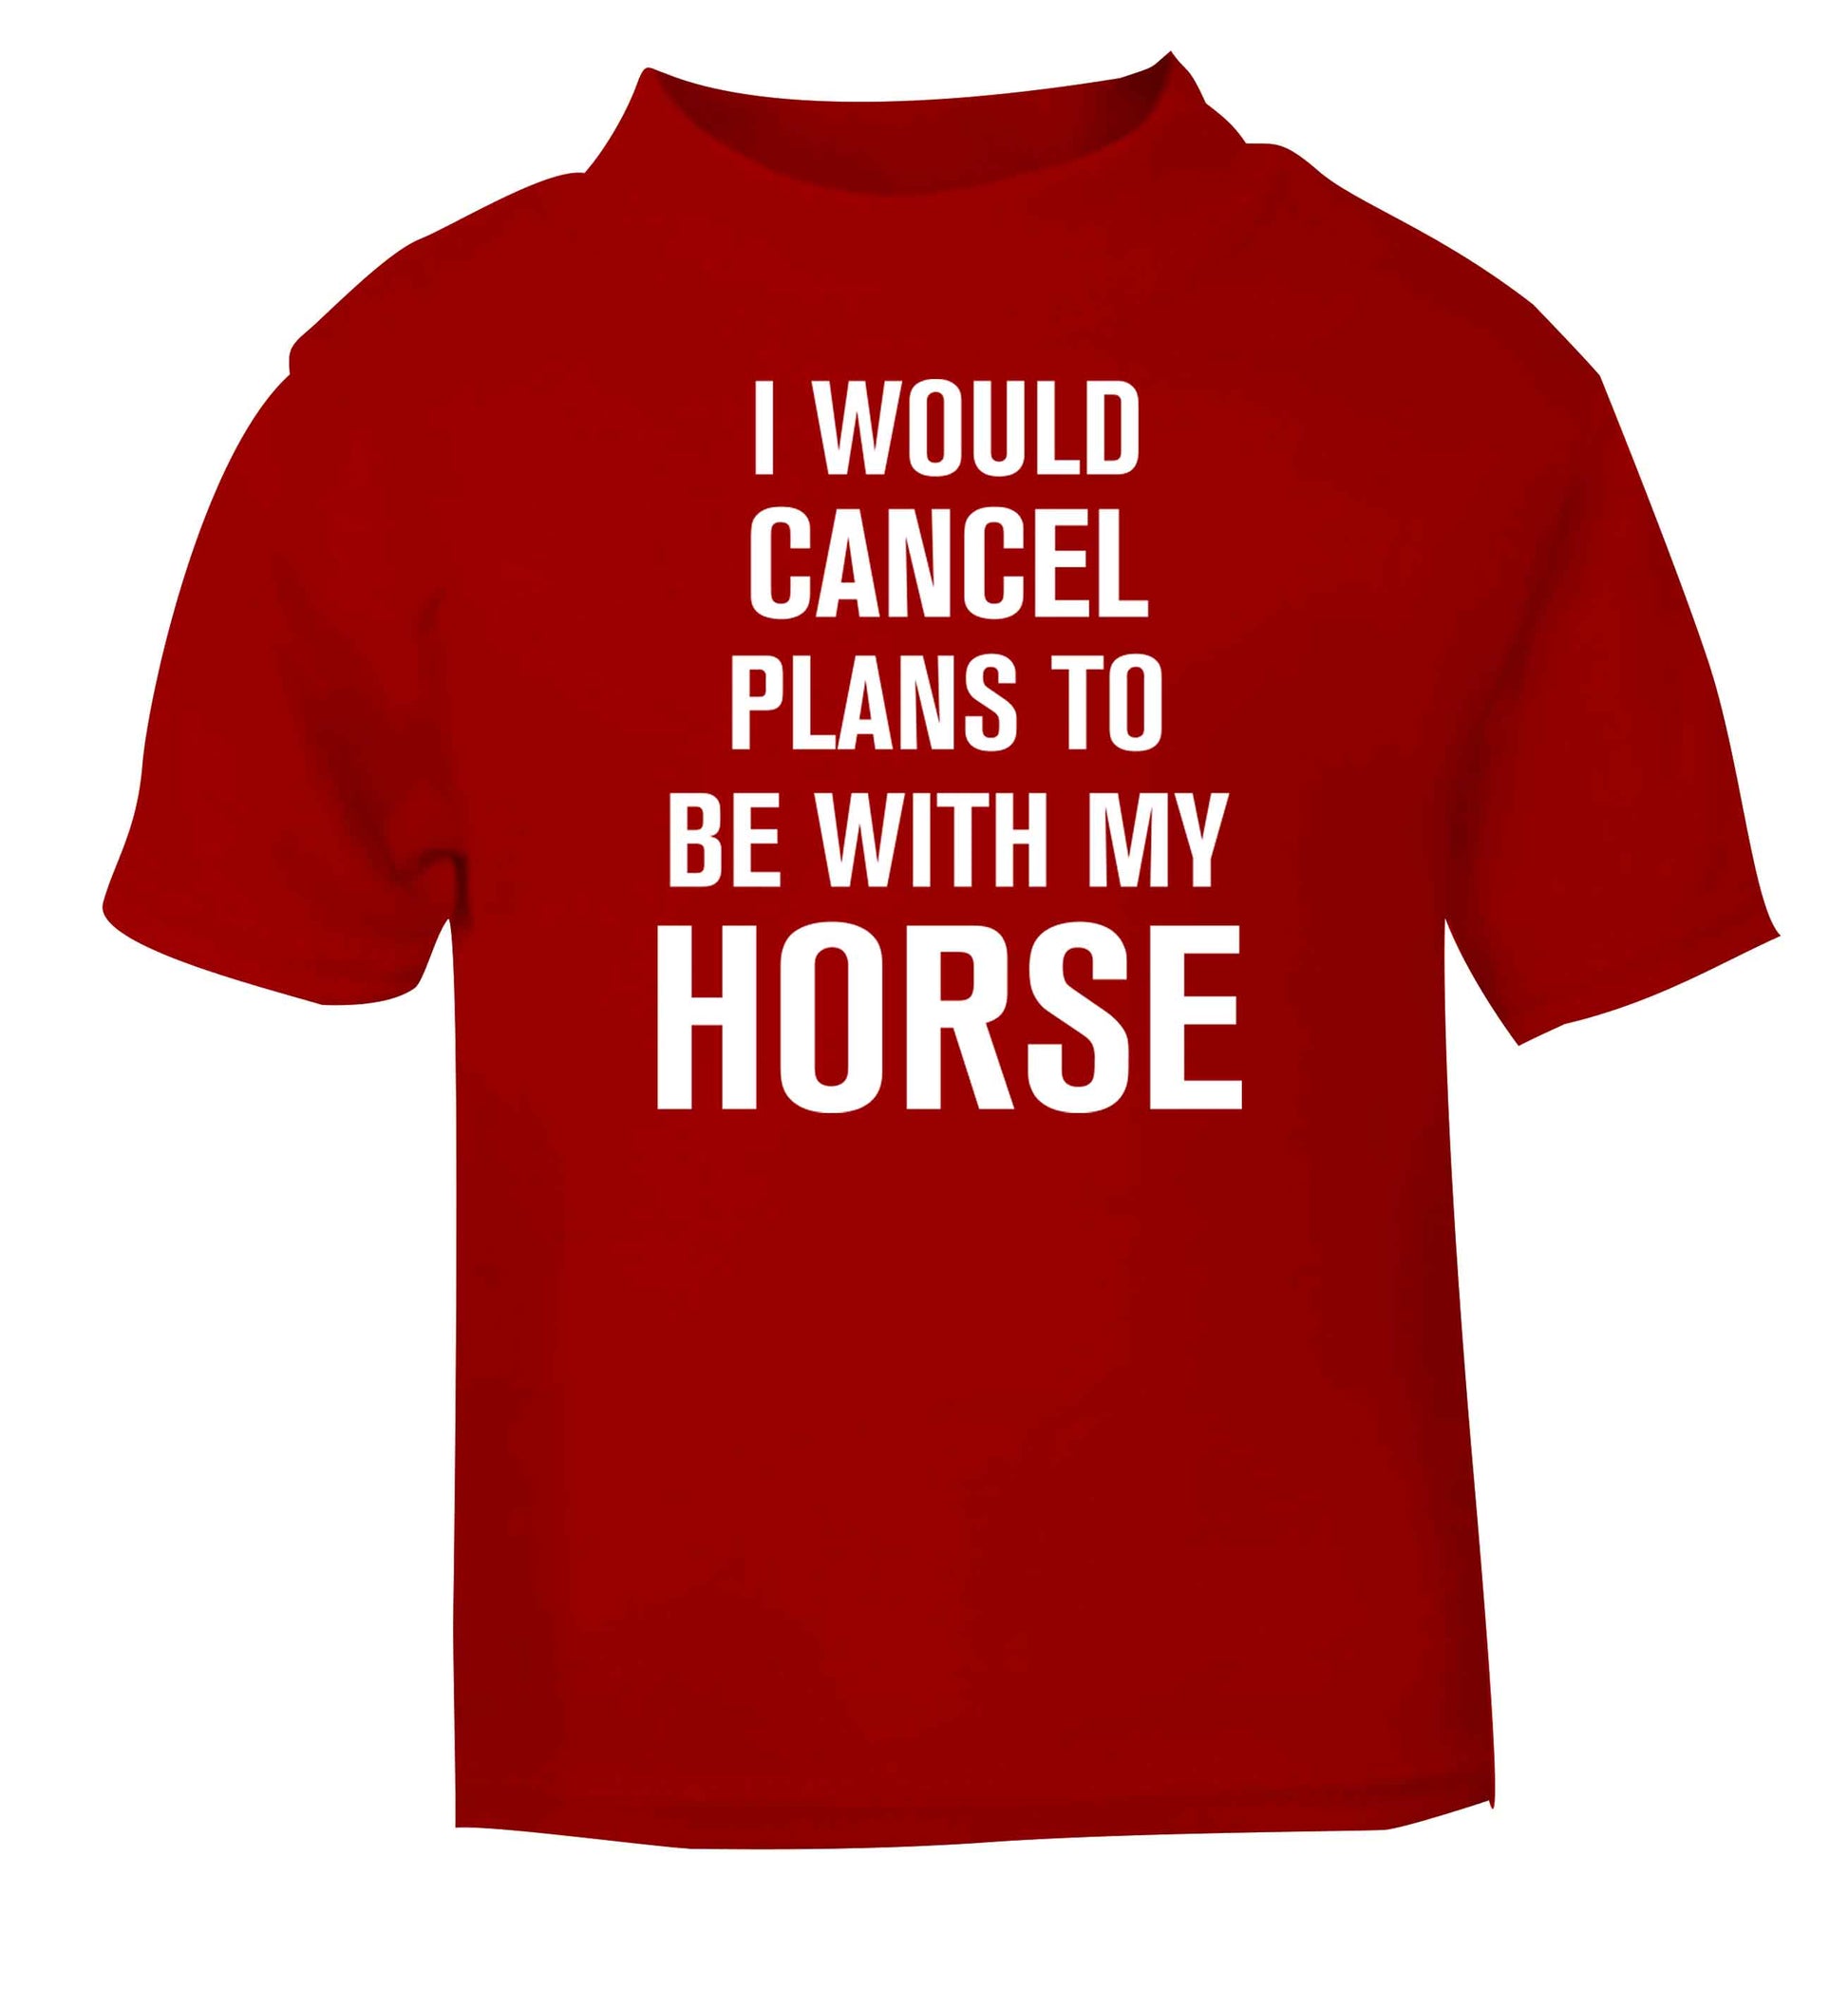 I will cancel plans to be with my horse red baby toddler Tshirt 2 Years